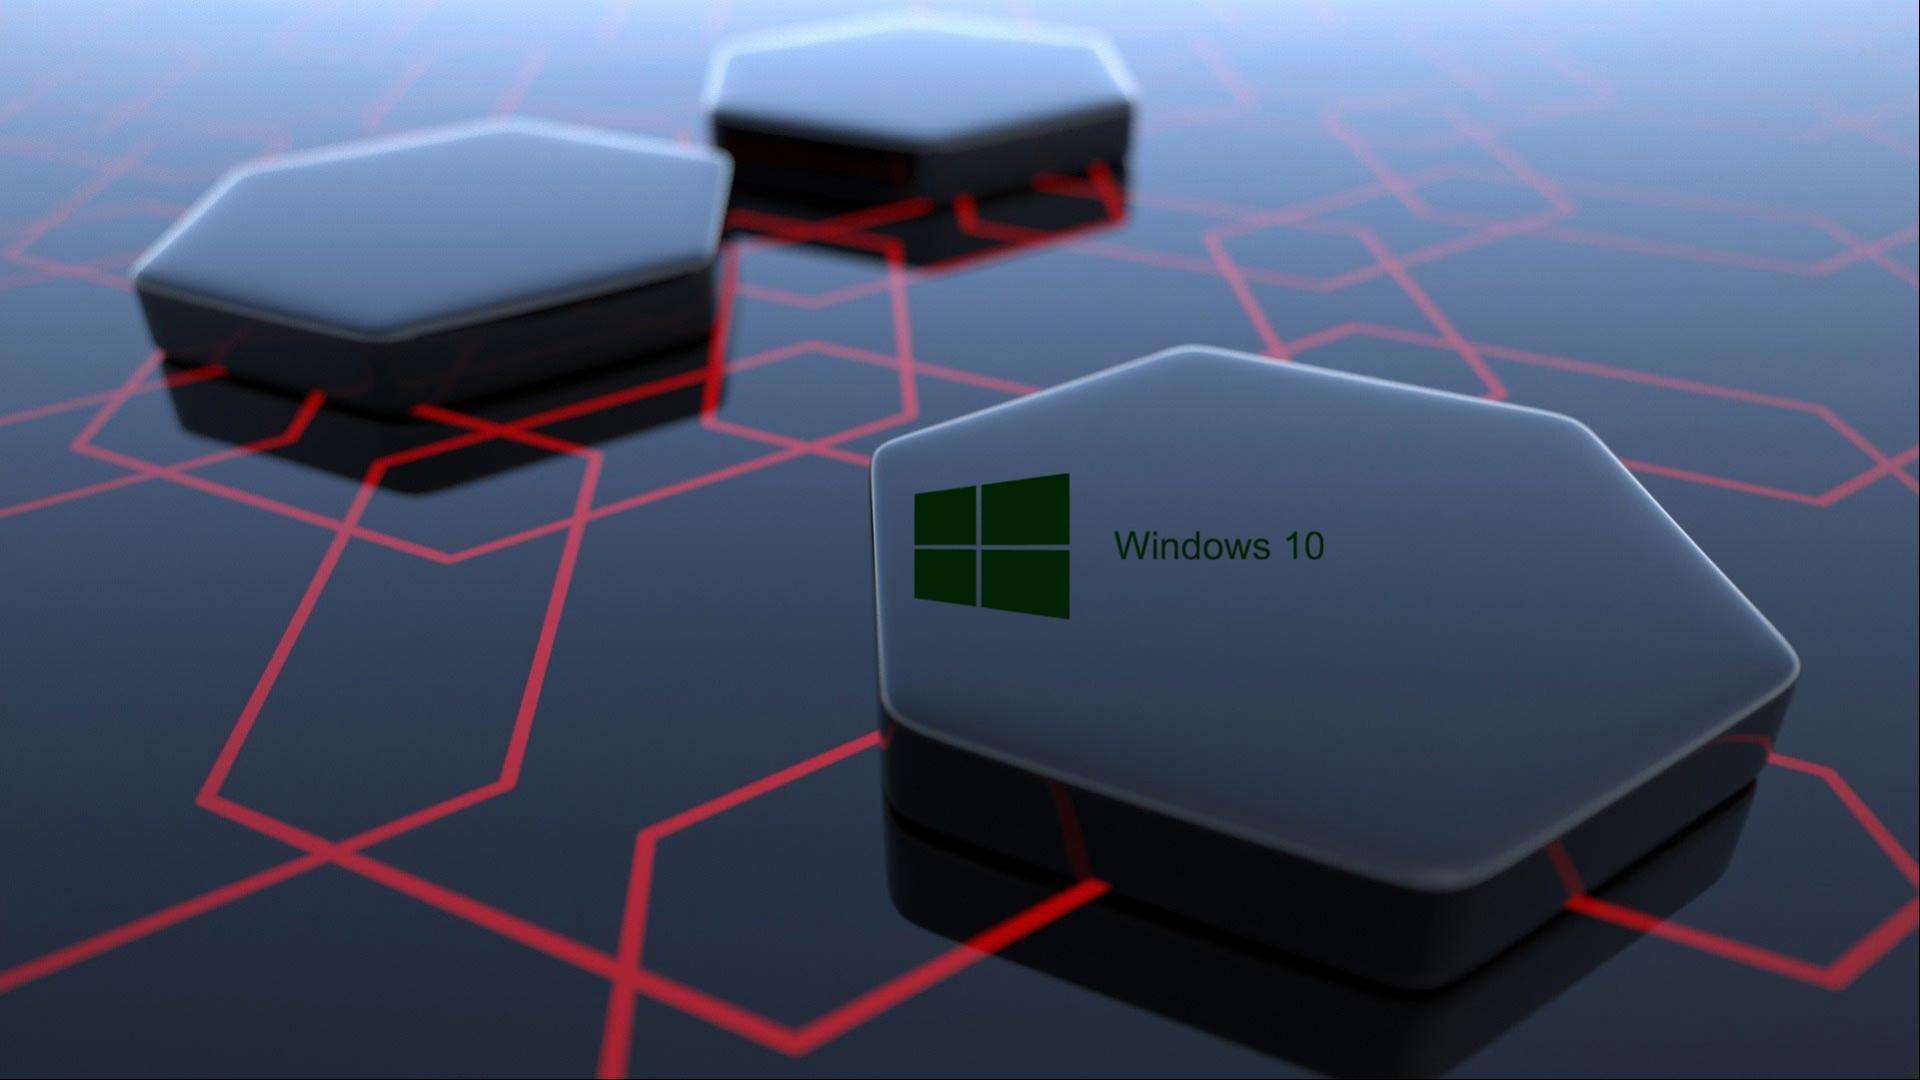 24 Stunning Windows 10 Wallpapers HD For Your Desktop